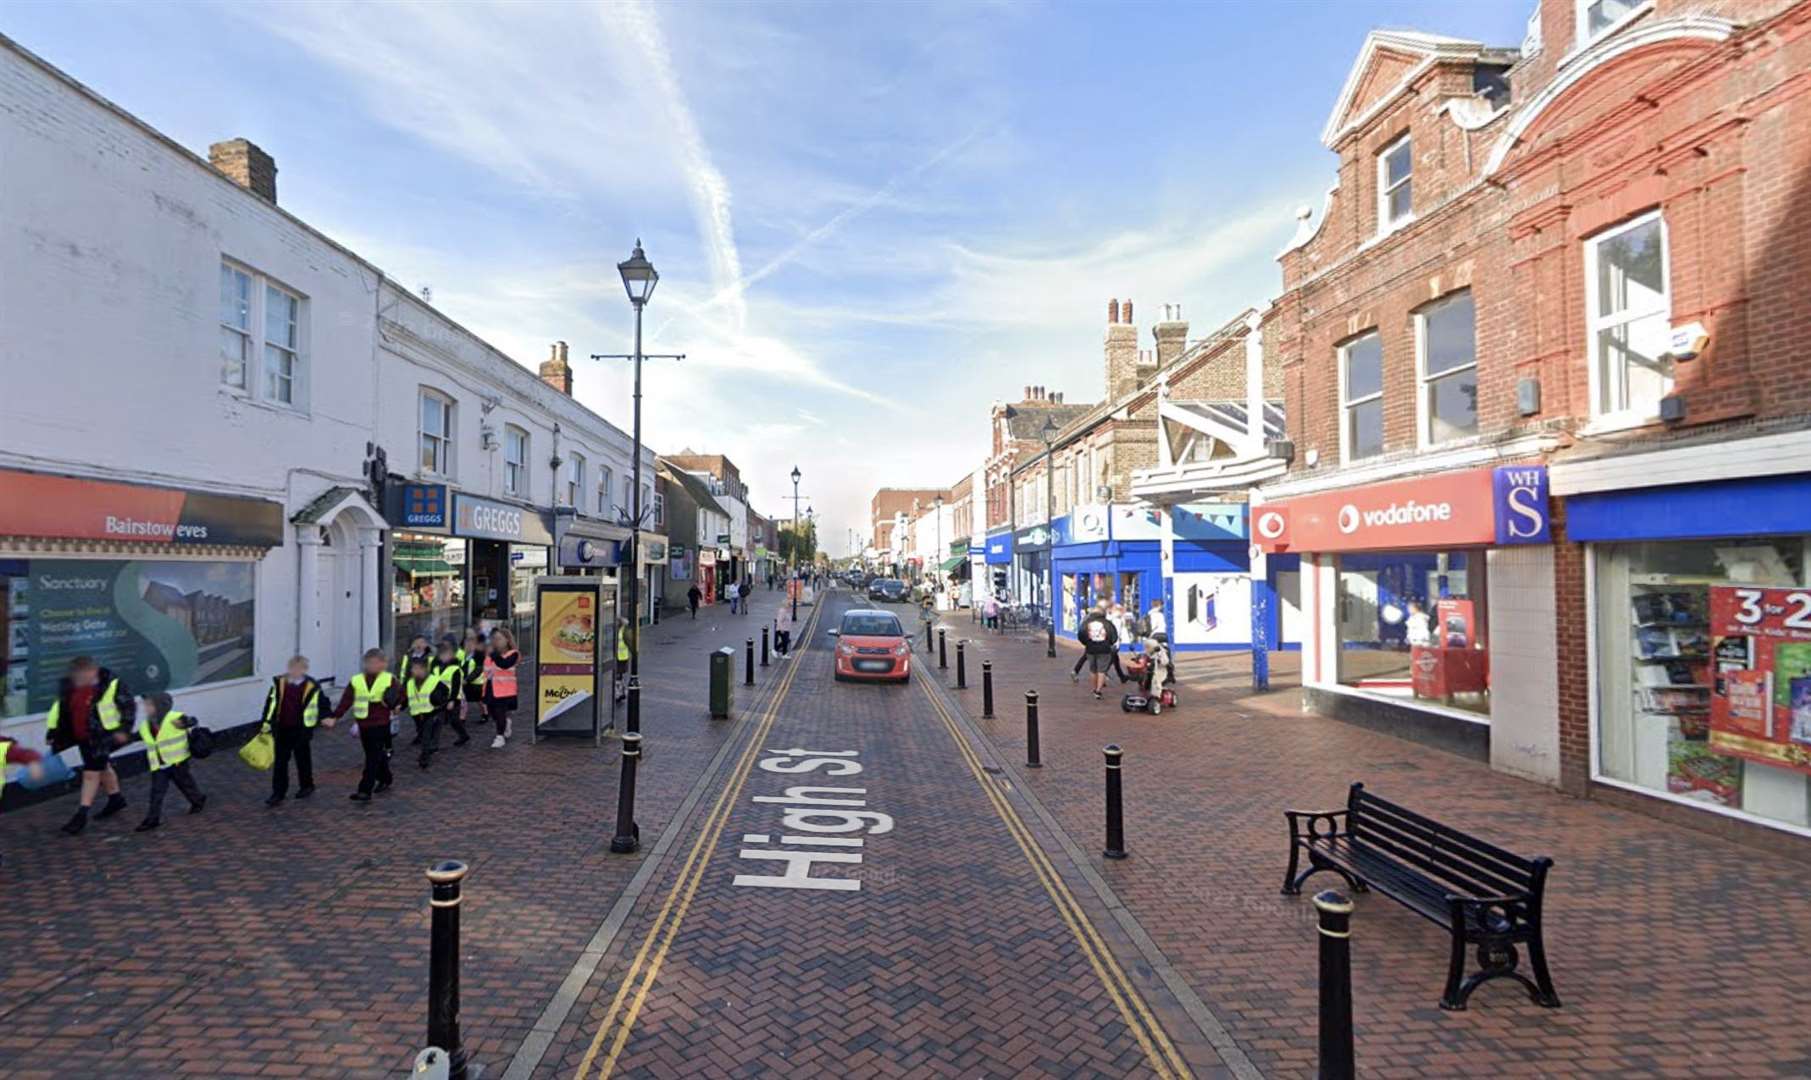 A woman reportedly had £60 taken from her purse while she was shopping at a store in the High Street. Picture: Google maps